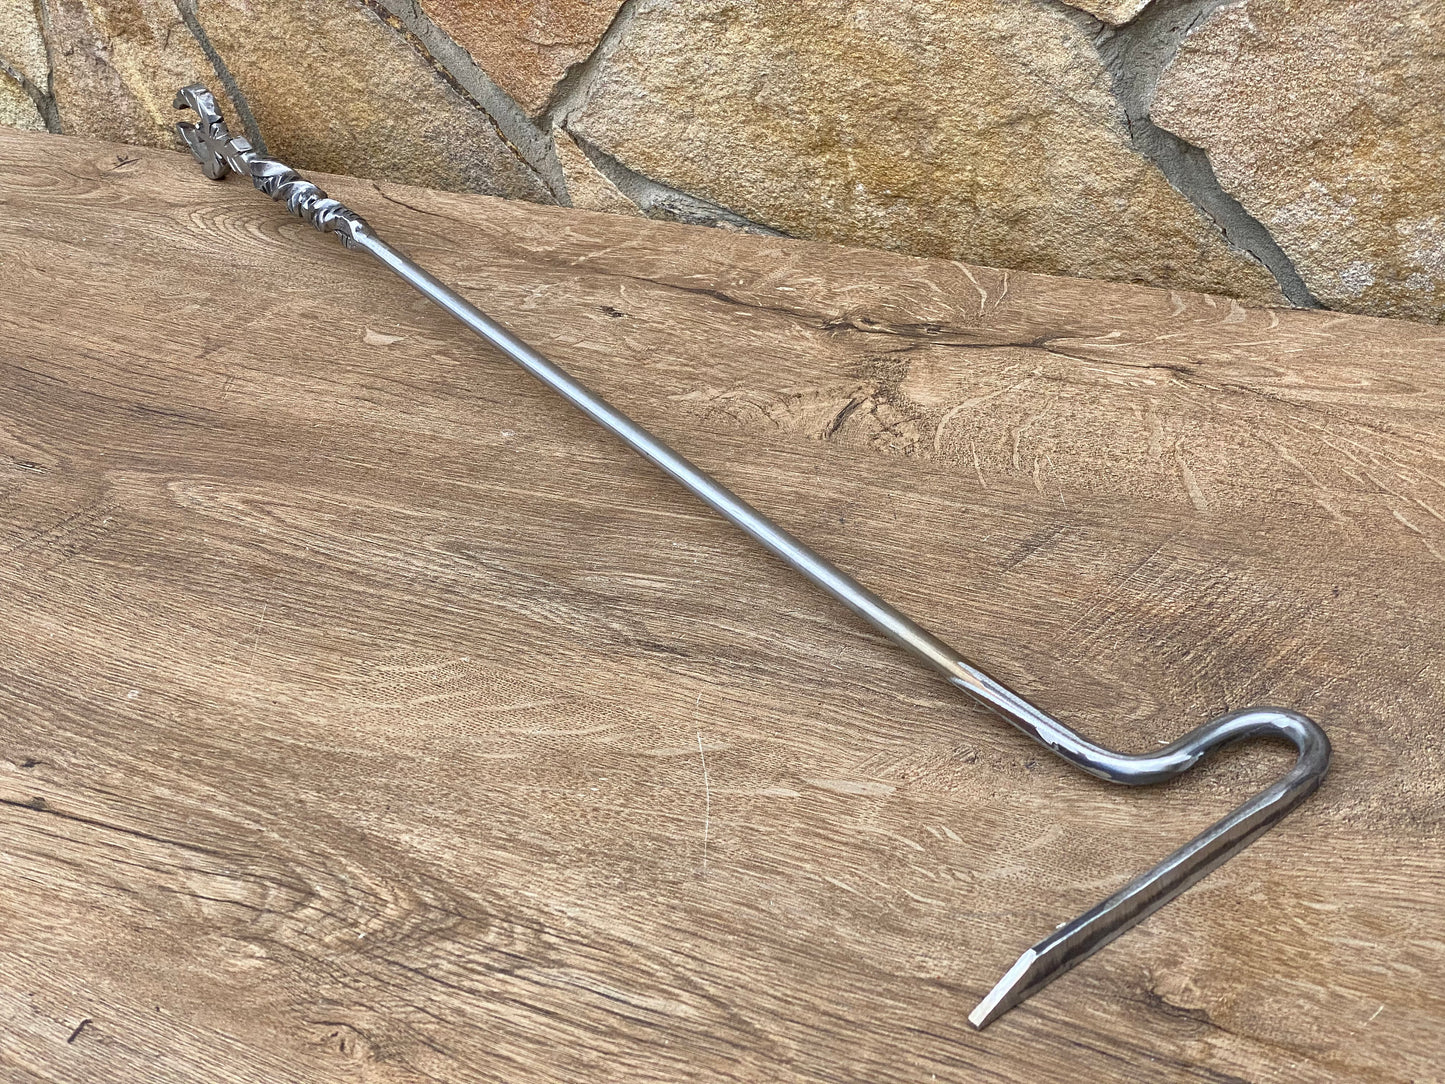 Stainless steel fire poker, phoenix, birthday, fireplace poker, Christmas, fire poker, BBQ, fireplace tool, Fathers day, fire pit,steel gift